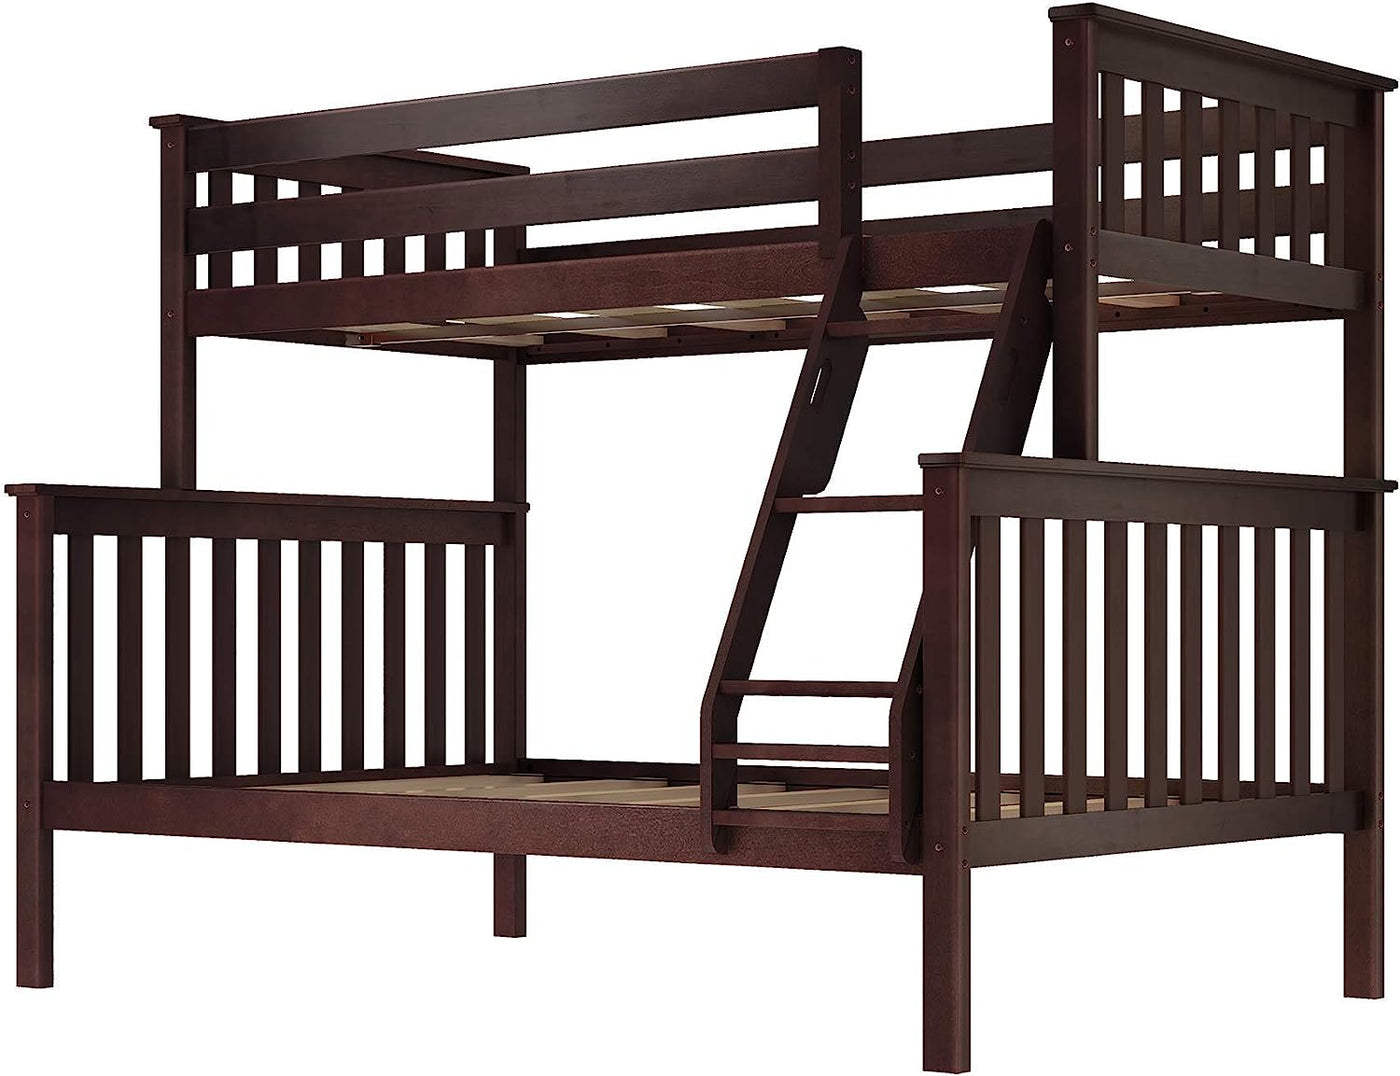 Max & Lily Bunk Bed, Twin-Over-Full Wood Bed Frame For Kids, Espresso - $345